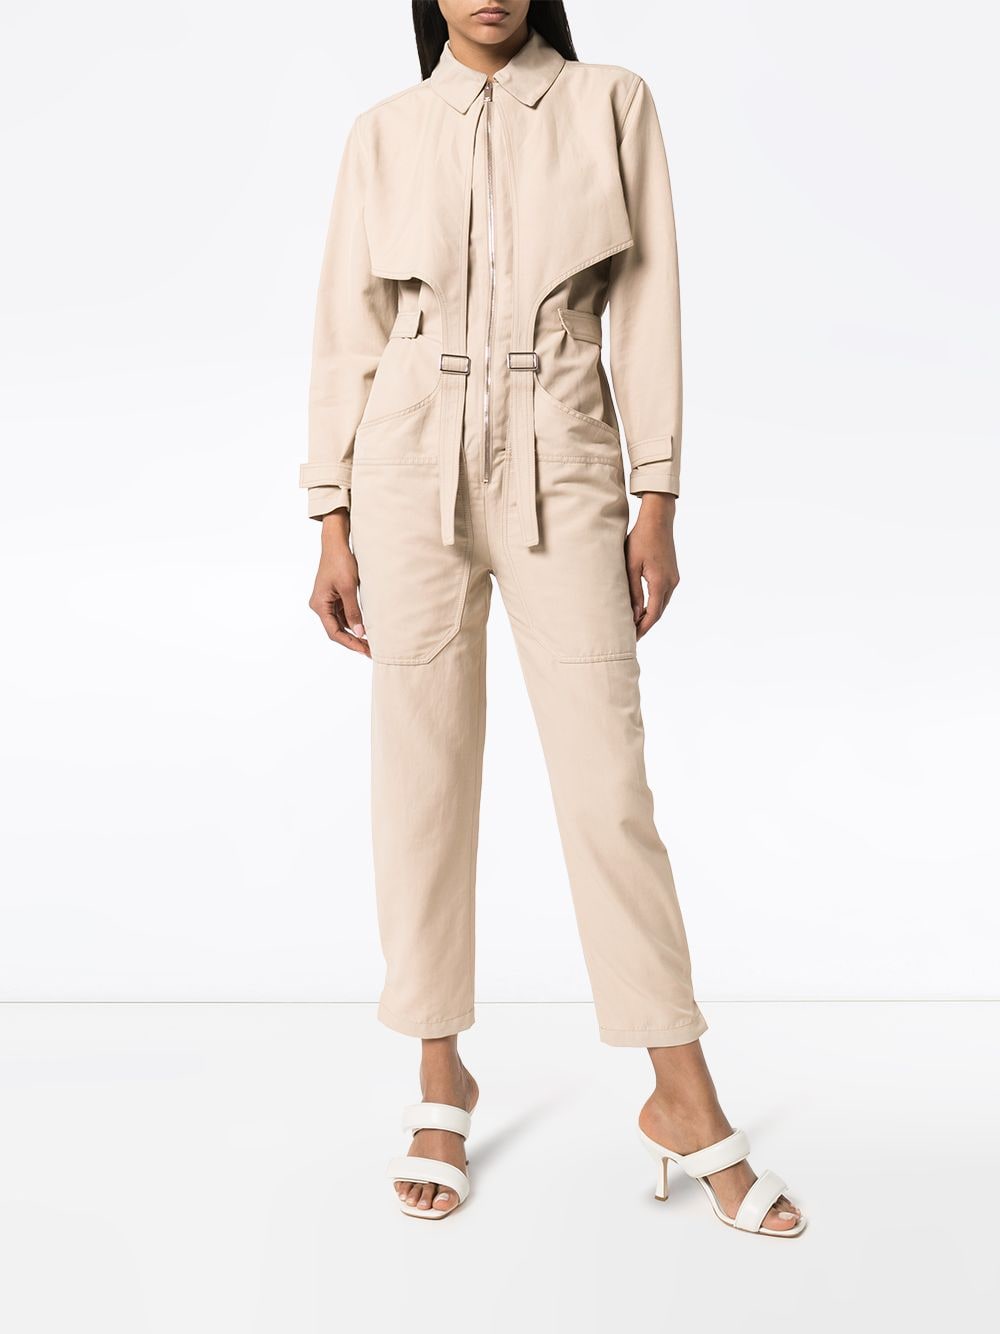 Stella McCartney All In One Jumpsuit - Pebbles (4737557889159)